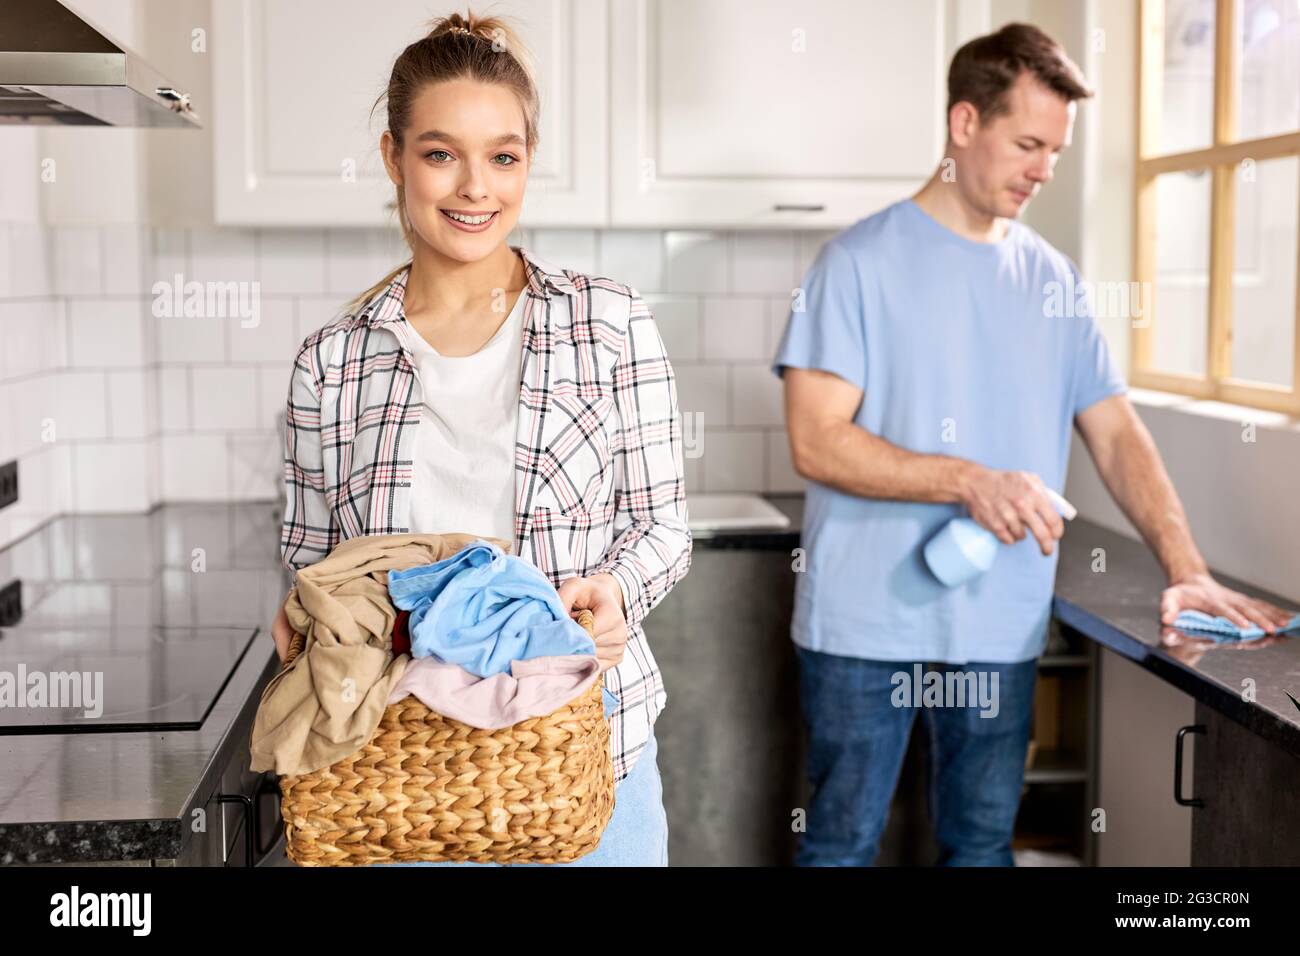 Man husband cleaning the house helping wife Stock Photo - Alamy